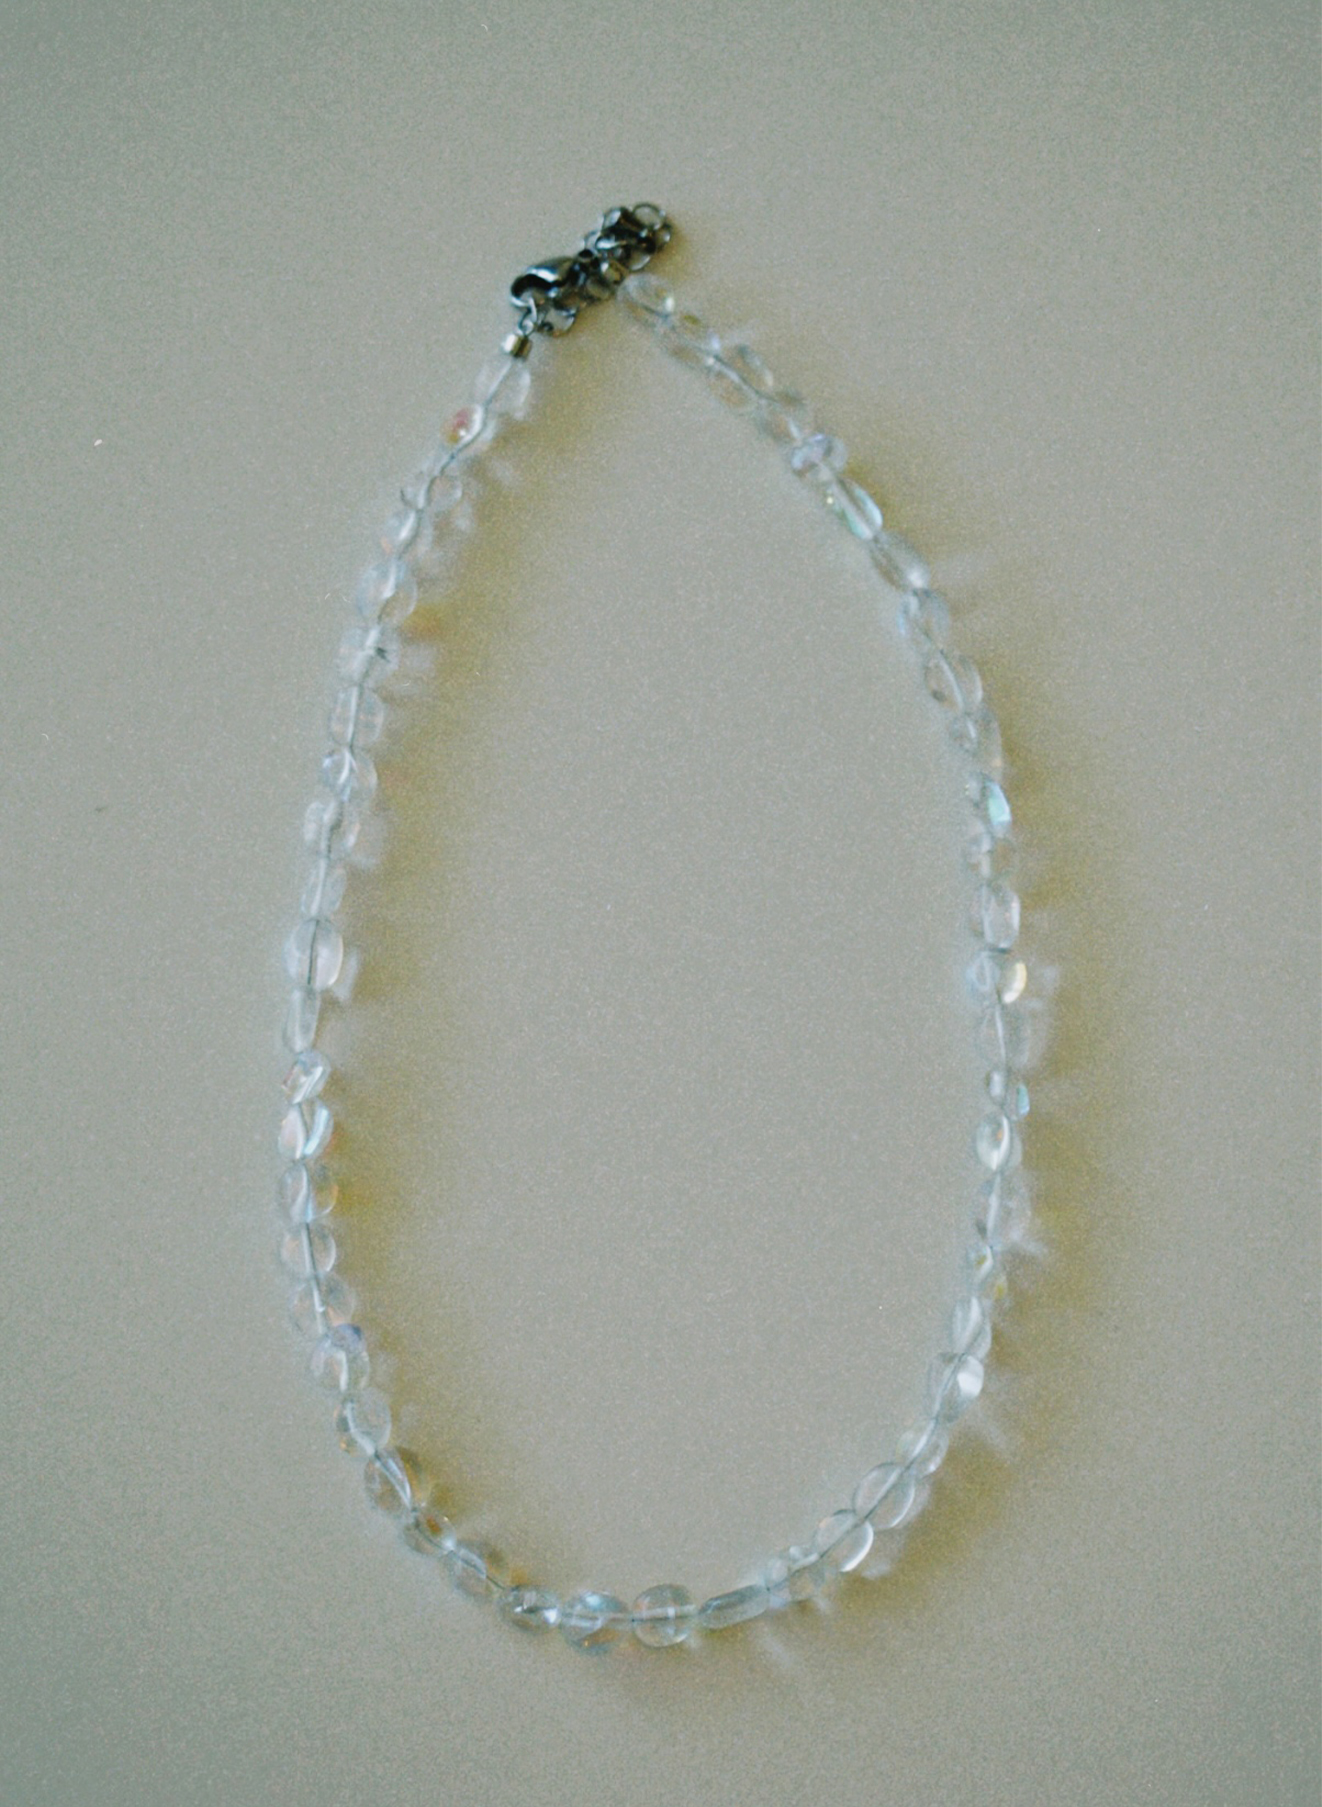 Transparency necklace